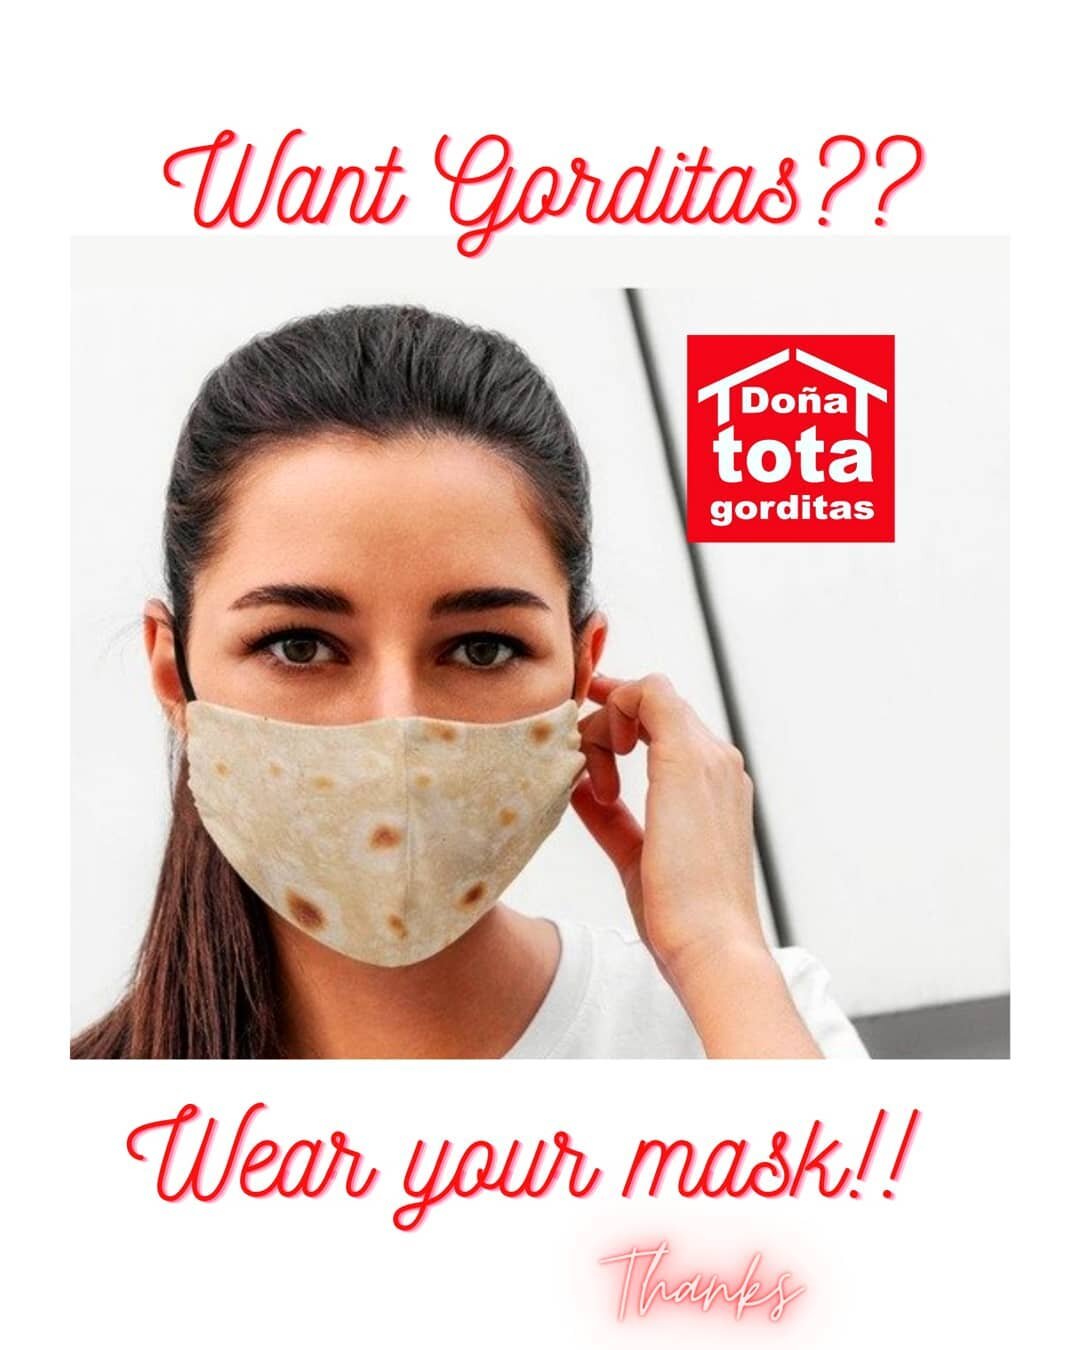 Want GORDITAS?? Where a mask!! Dona Tota #texas is doing its part in helping stop the spread of #covid19 as best we can but we ask for your help in complying with our restaurants mask policy.  We hope to see you safe and soon at one of our 5 Texas lo